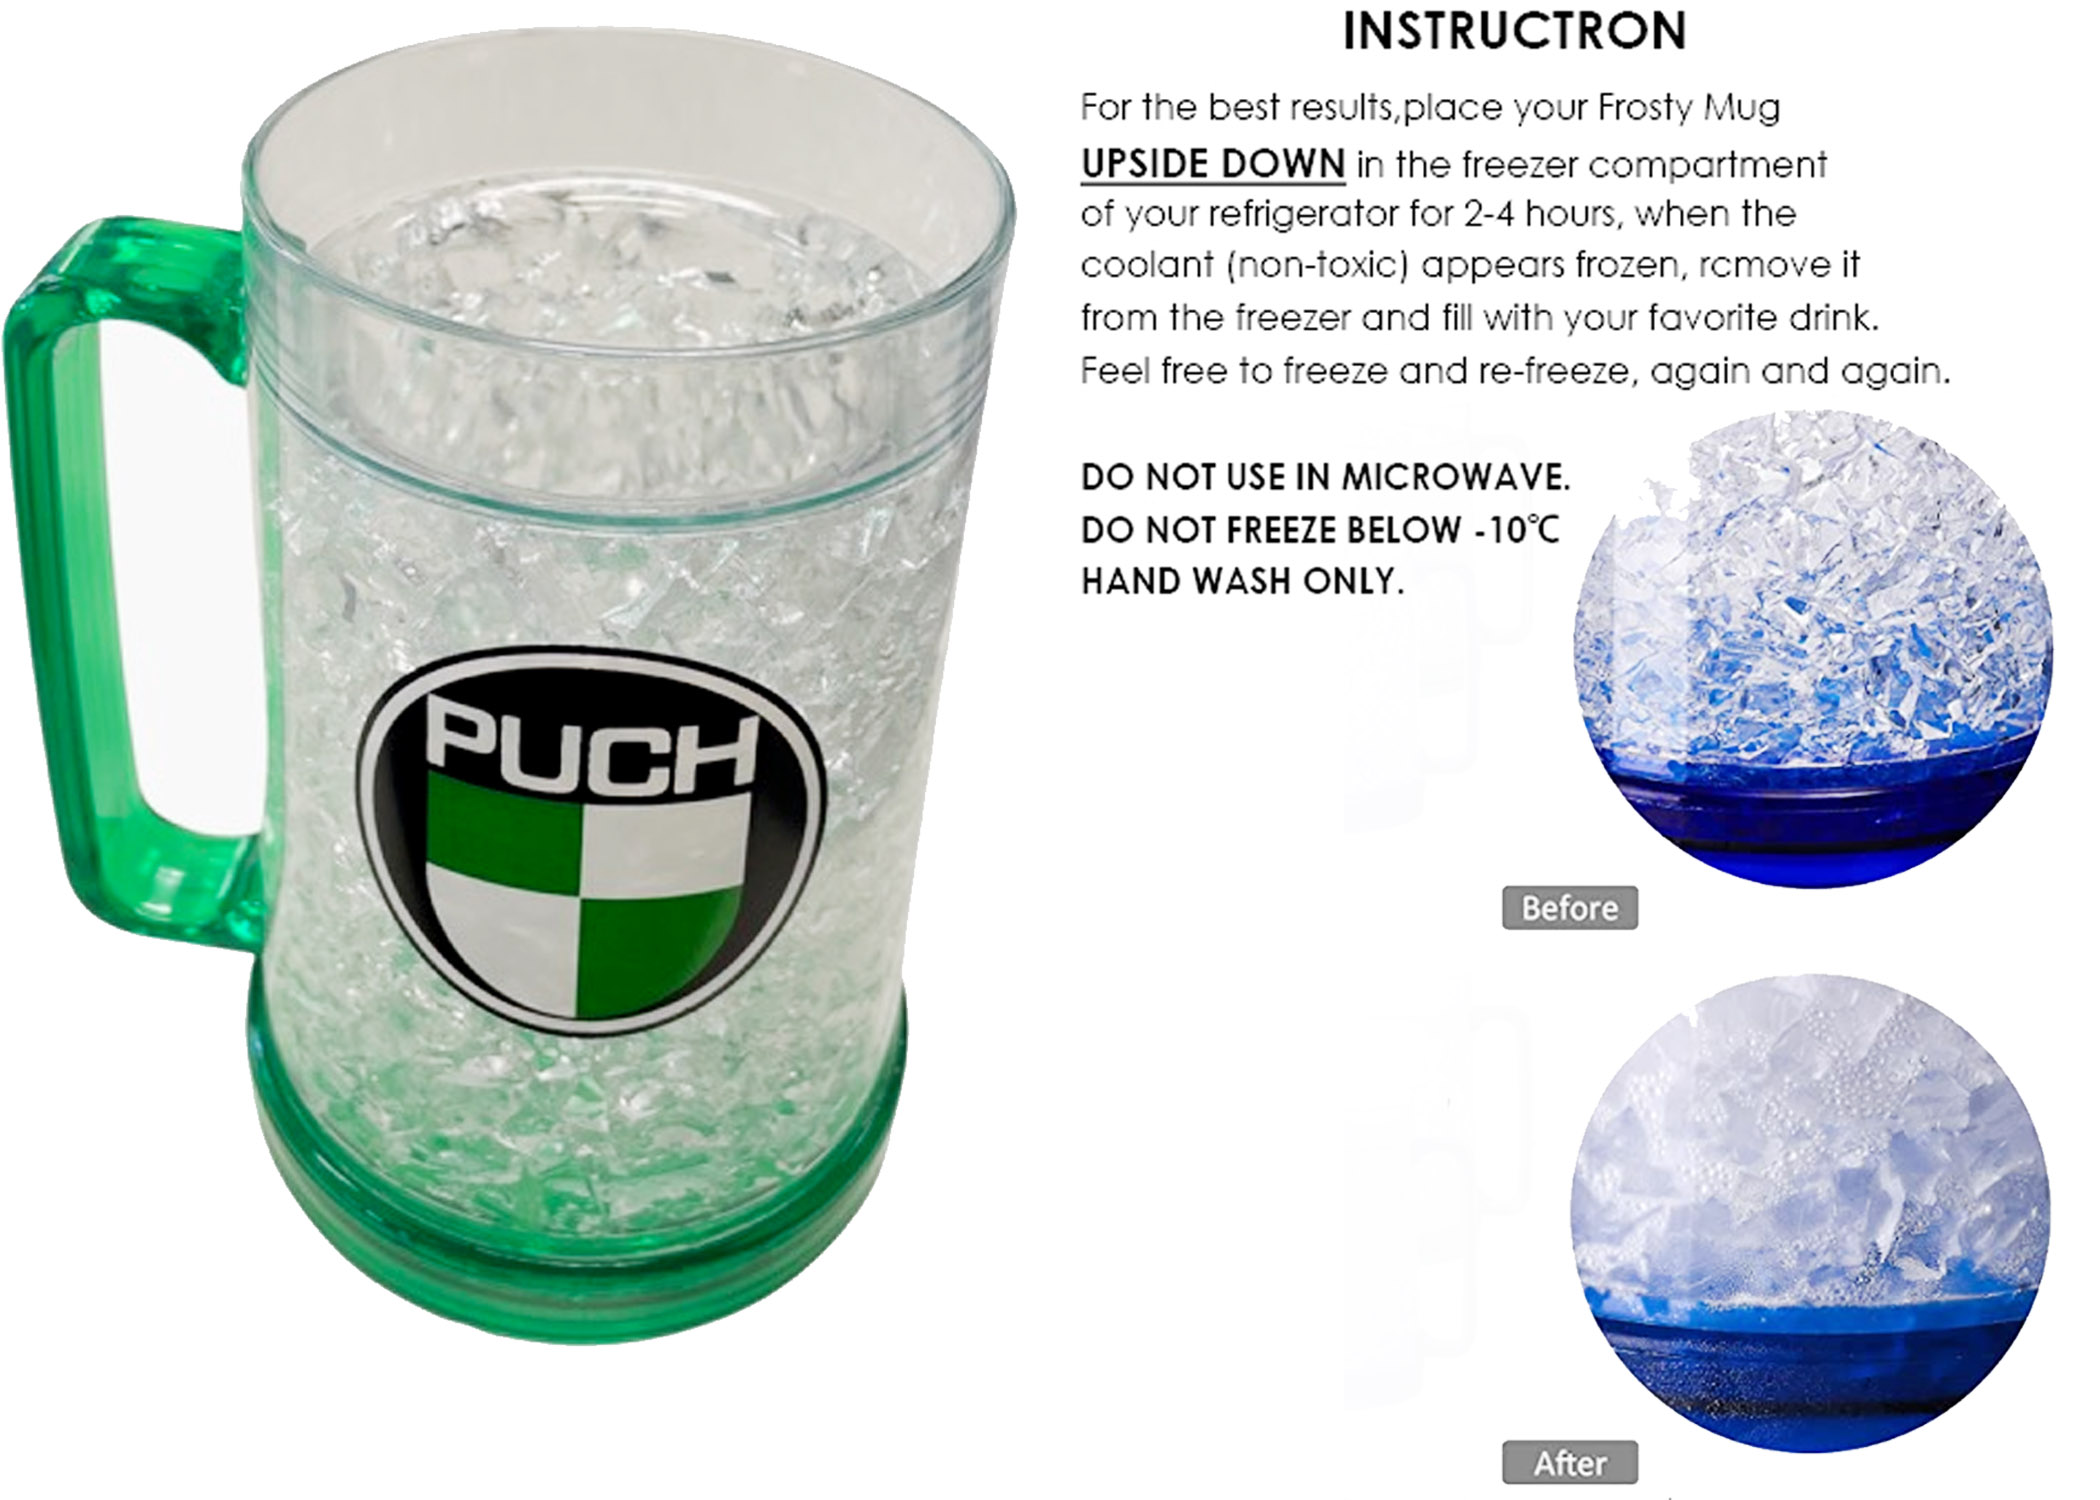 PUCH MAXI MS MV MONZA UNIVERSAL Beer mug / cup / frosty mug with logo - 450 ML double walled - Ideal on hot days and beer parties - place in the freezer 2 - 3 hours and the mug is ice cold (see attached instructions)  freezing gel 